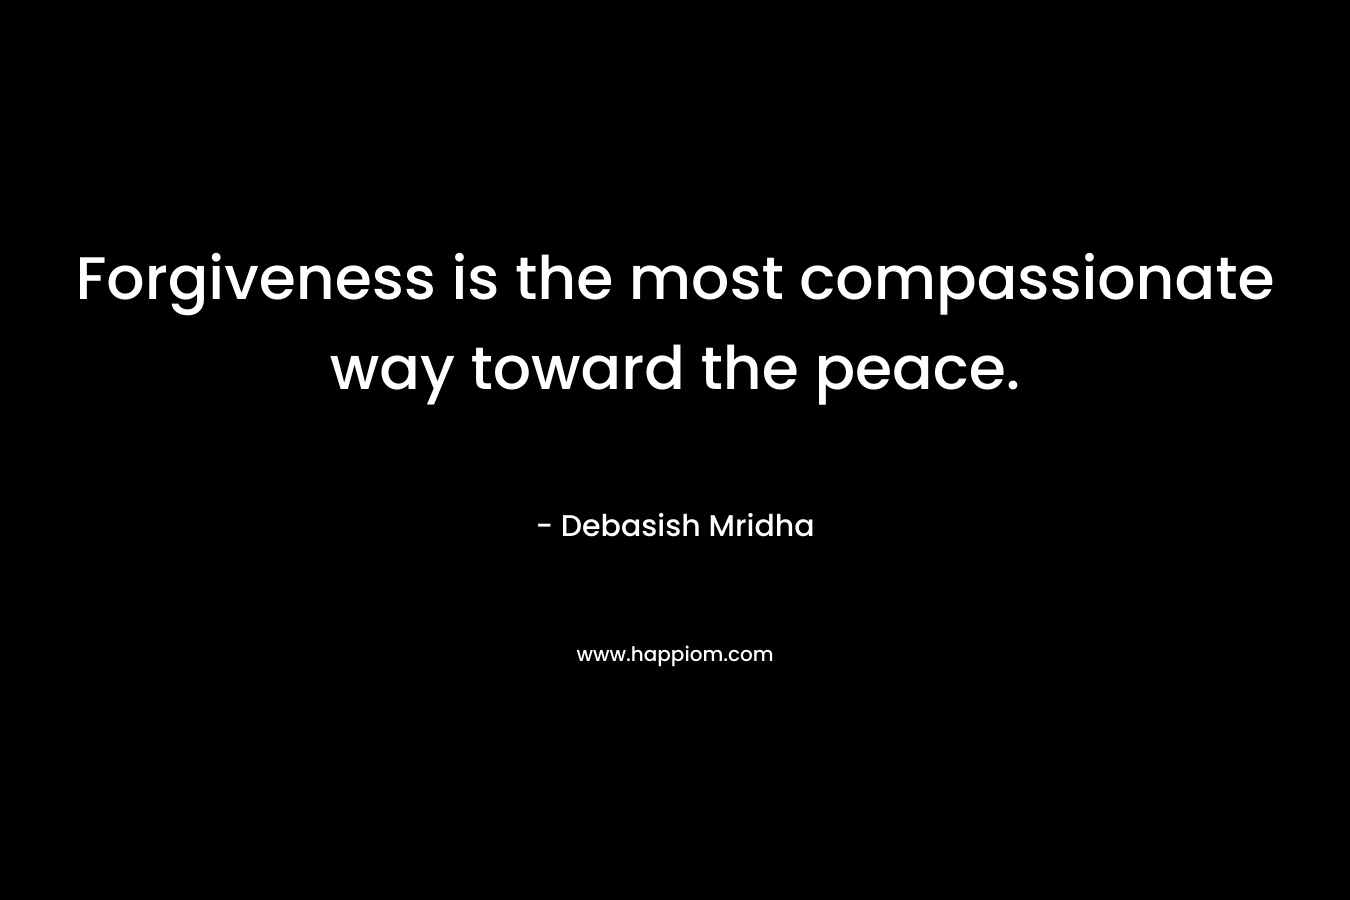 Forgiveness is the most compassionate way toward the peace.